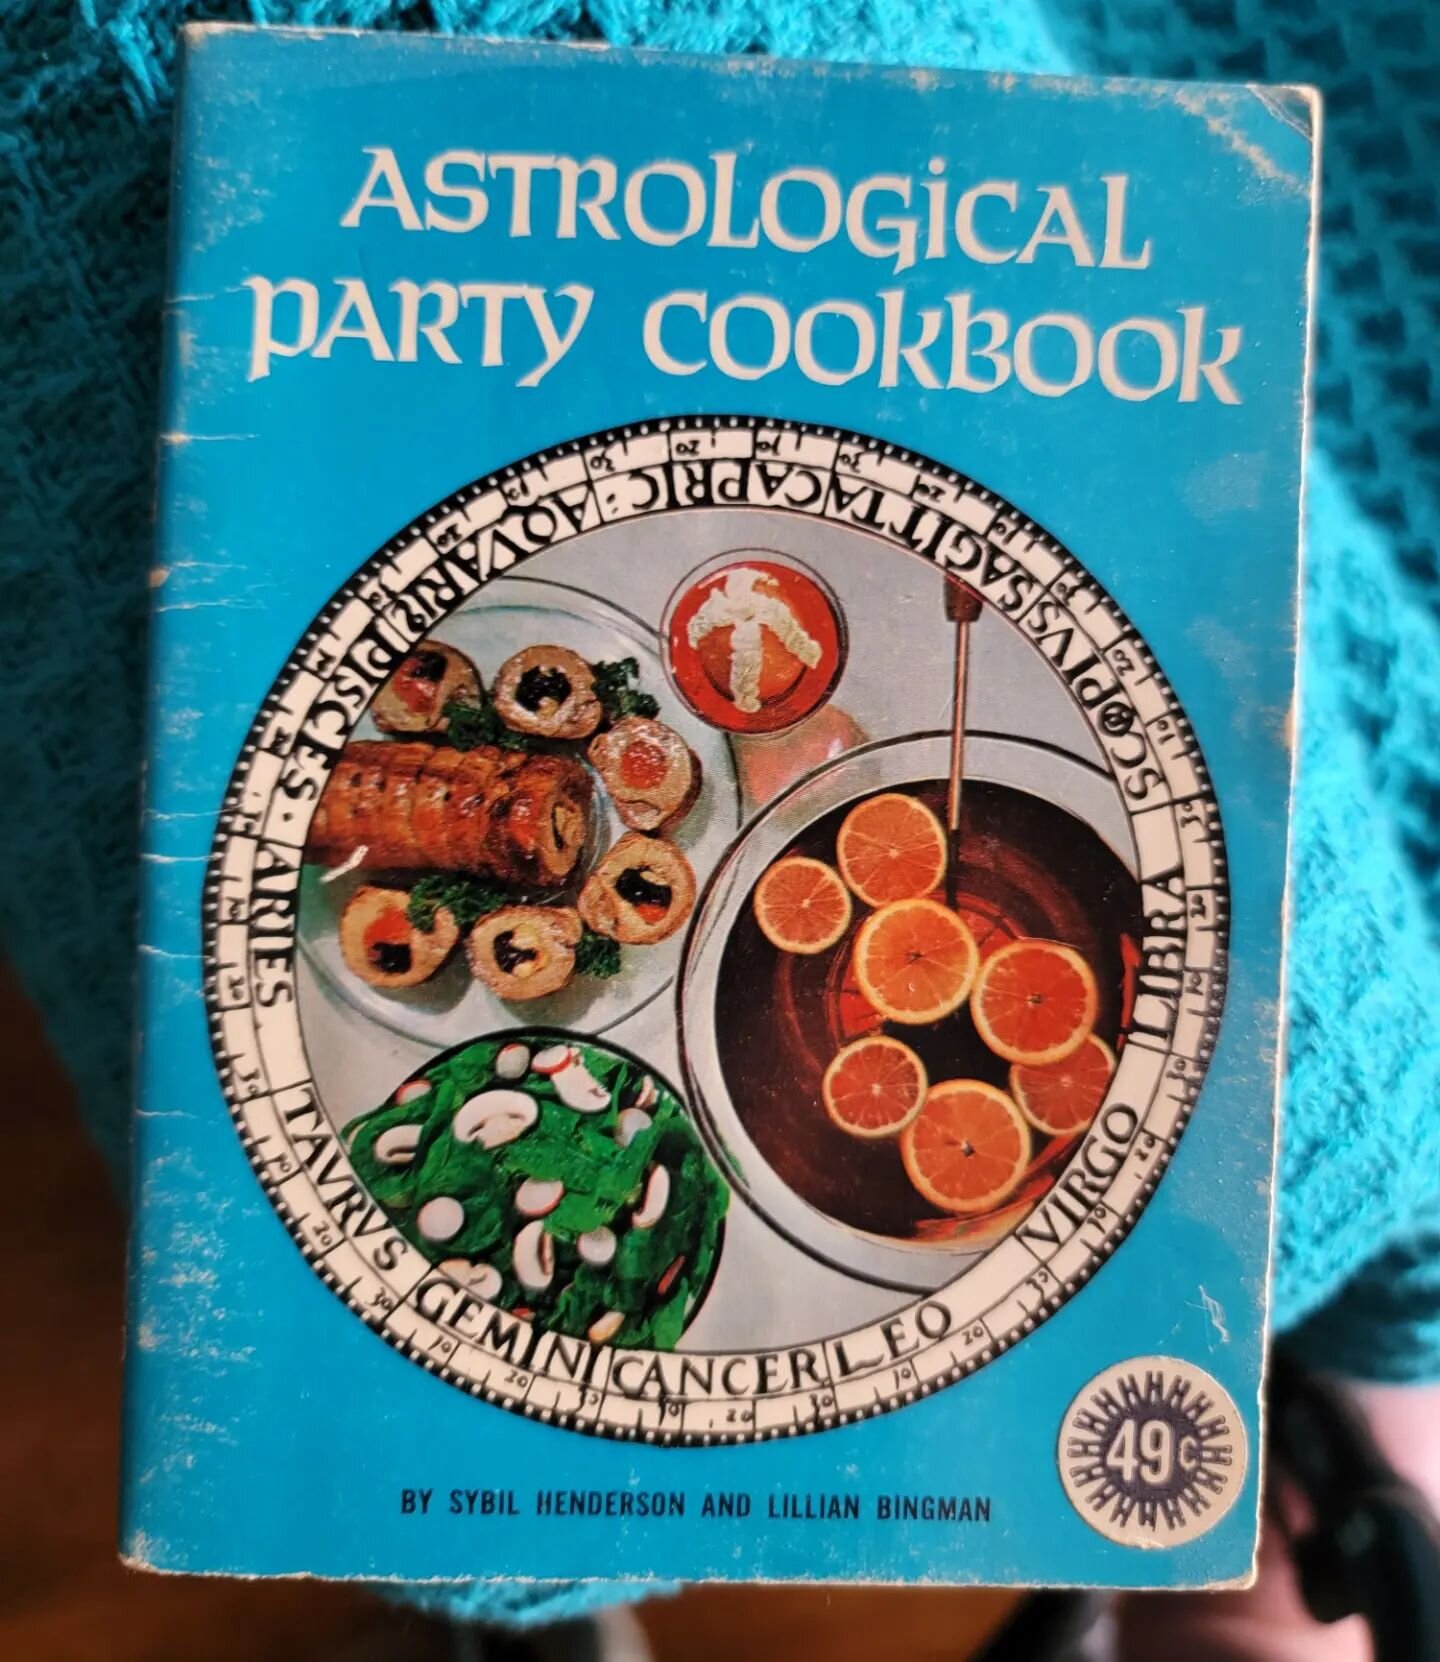 I lovelovelove these kinds of little books.. and as a Pisces i completely reject this entire menu.. except the fresh fruit in champagne. 

&quot;China peas&quot; .... when did this get changed to snow peapods?

Copyright 1969. #astrological  #party #